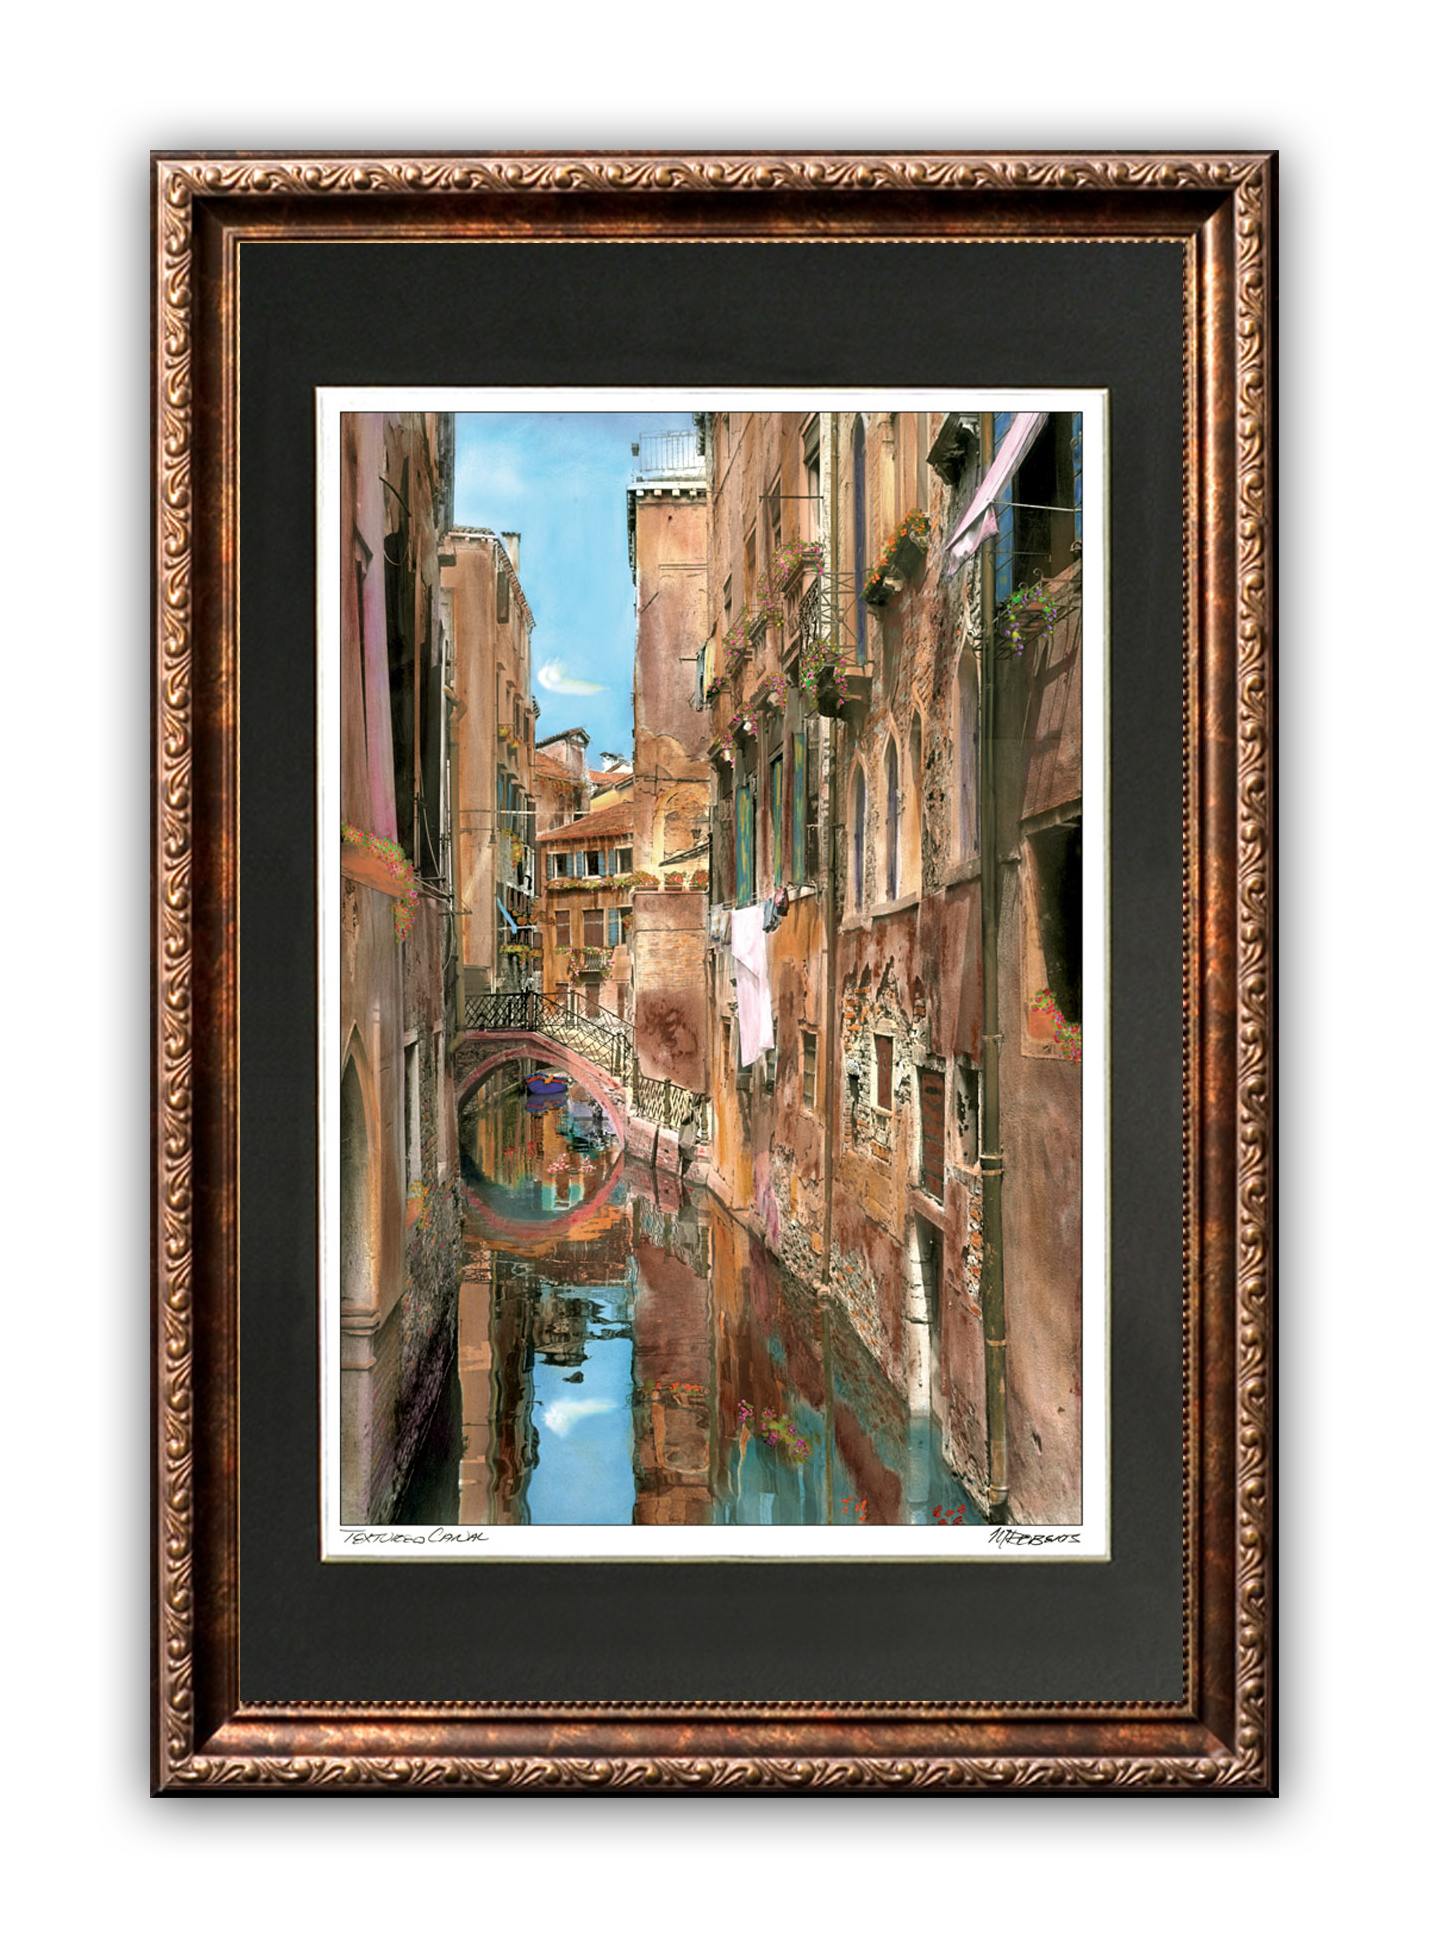 "Textured Canal" Signed Matted & Framed